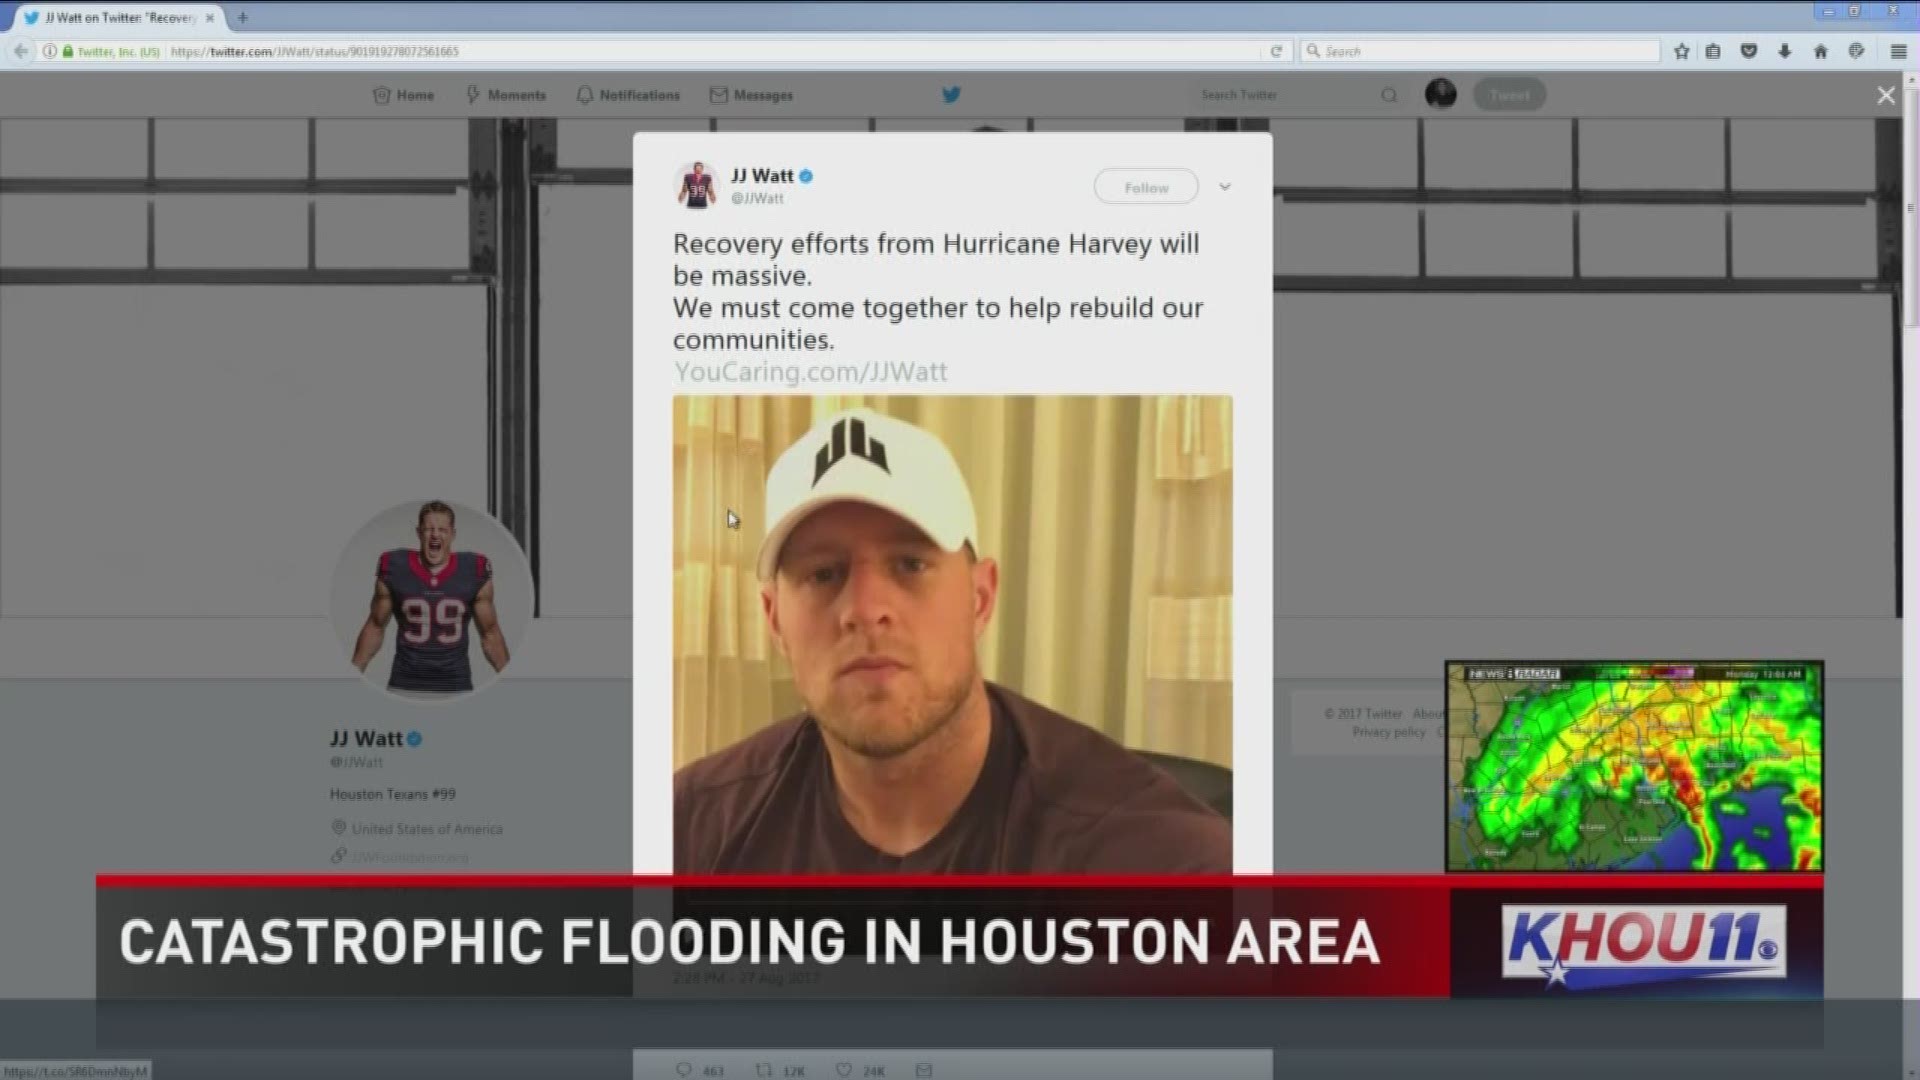 The Houston Texans star is leading a campaign that had raised $275,000 for flood relief as of 2 a.m. Monday.